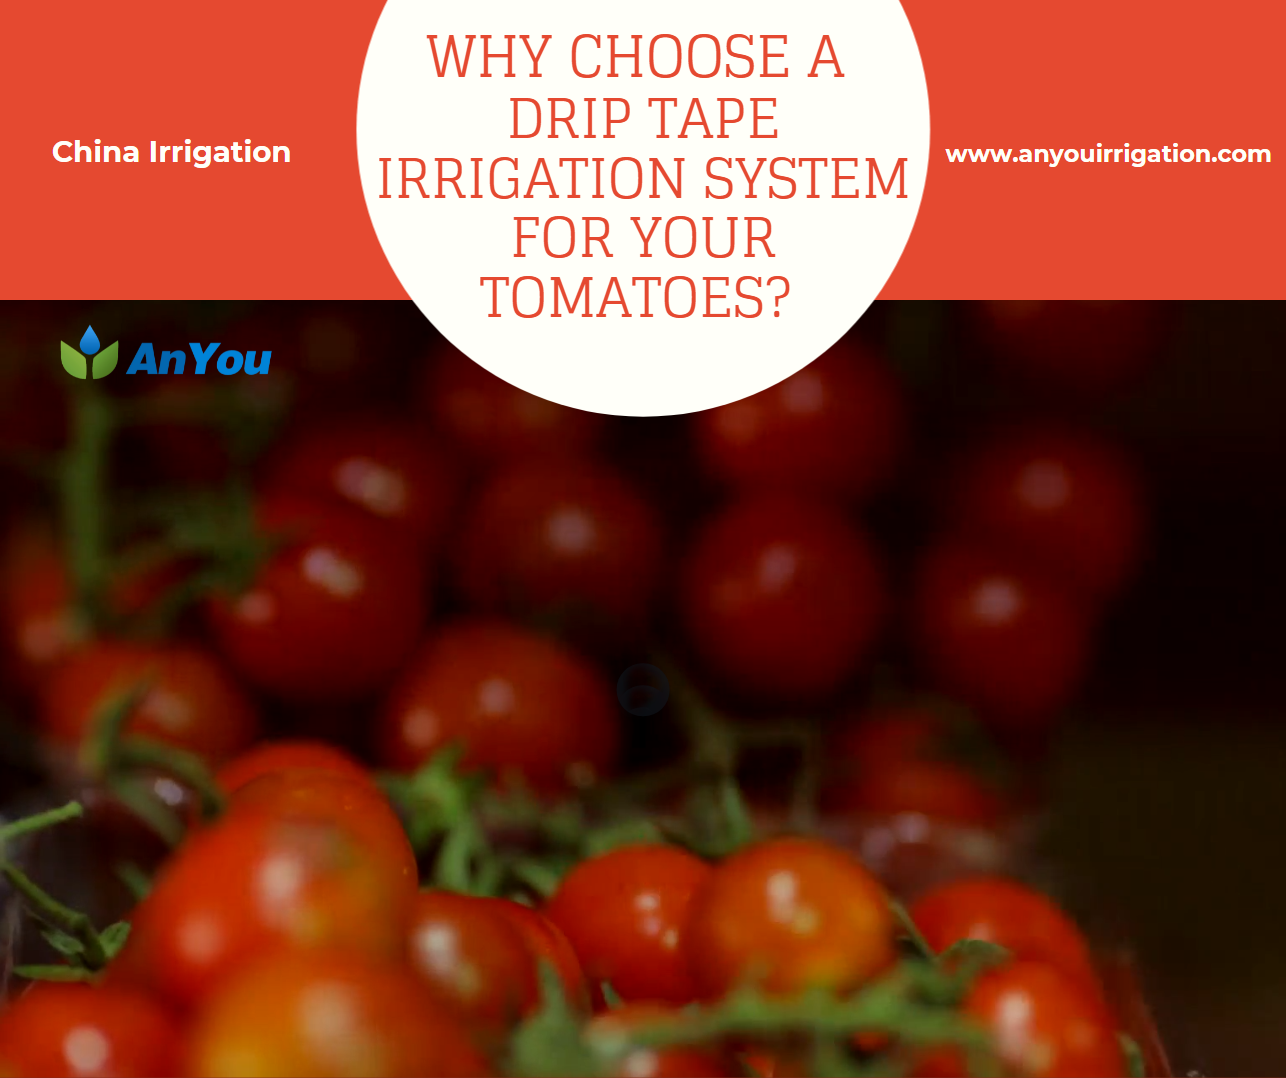 Why choose a drip tape irrigation system for your tomotoes?